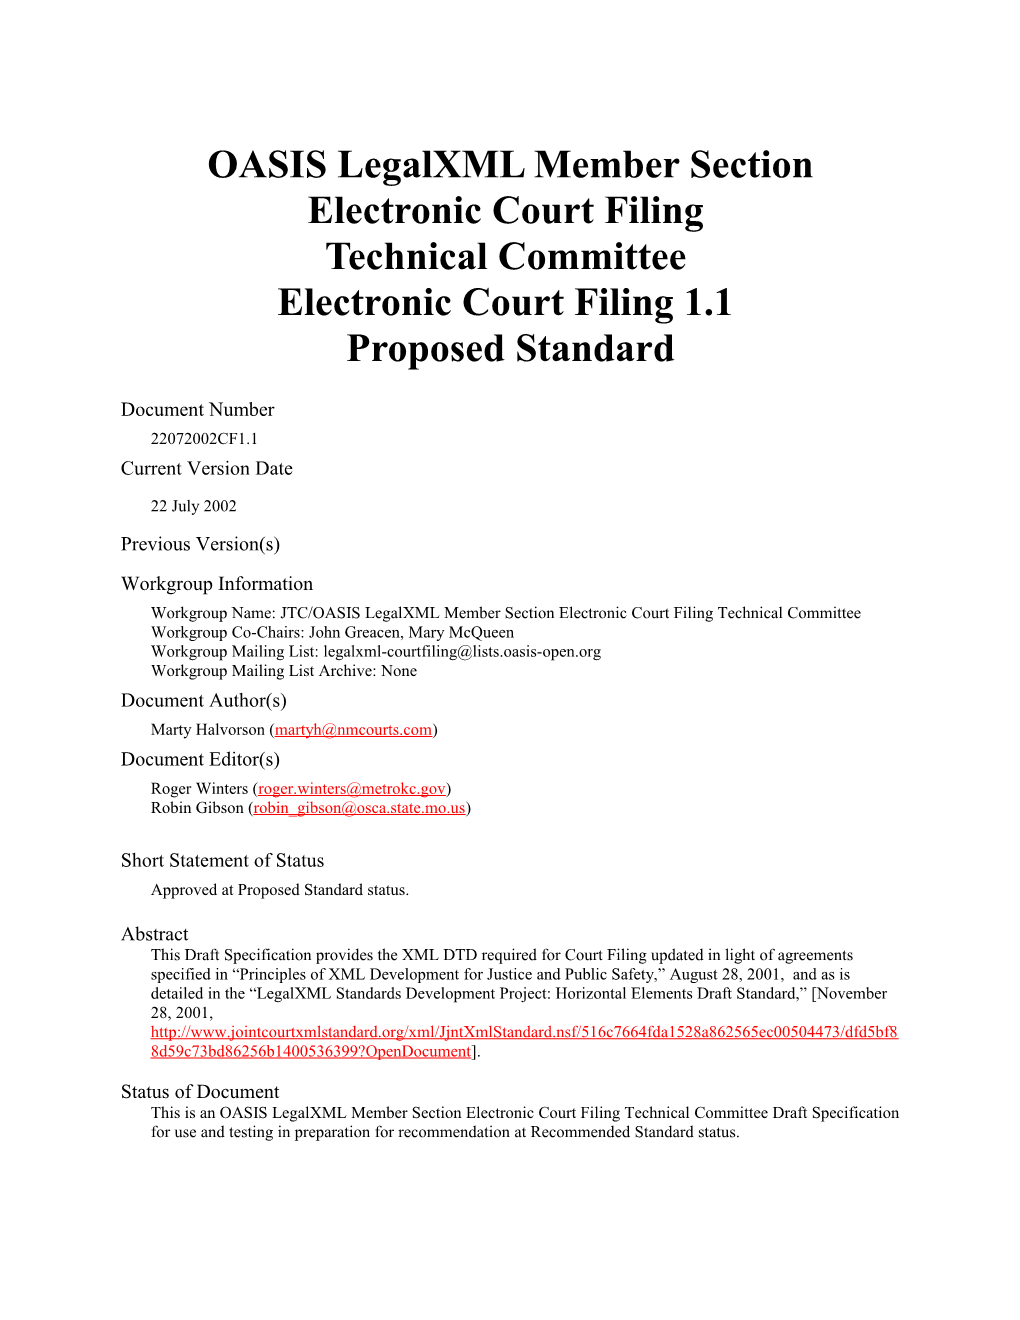 XML Standards Development Project Electronic Court Filing Draft Specification